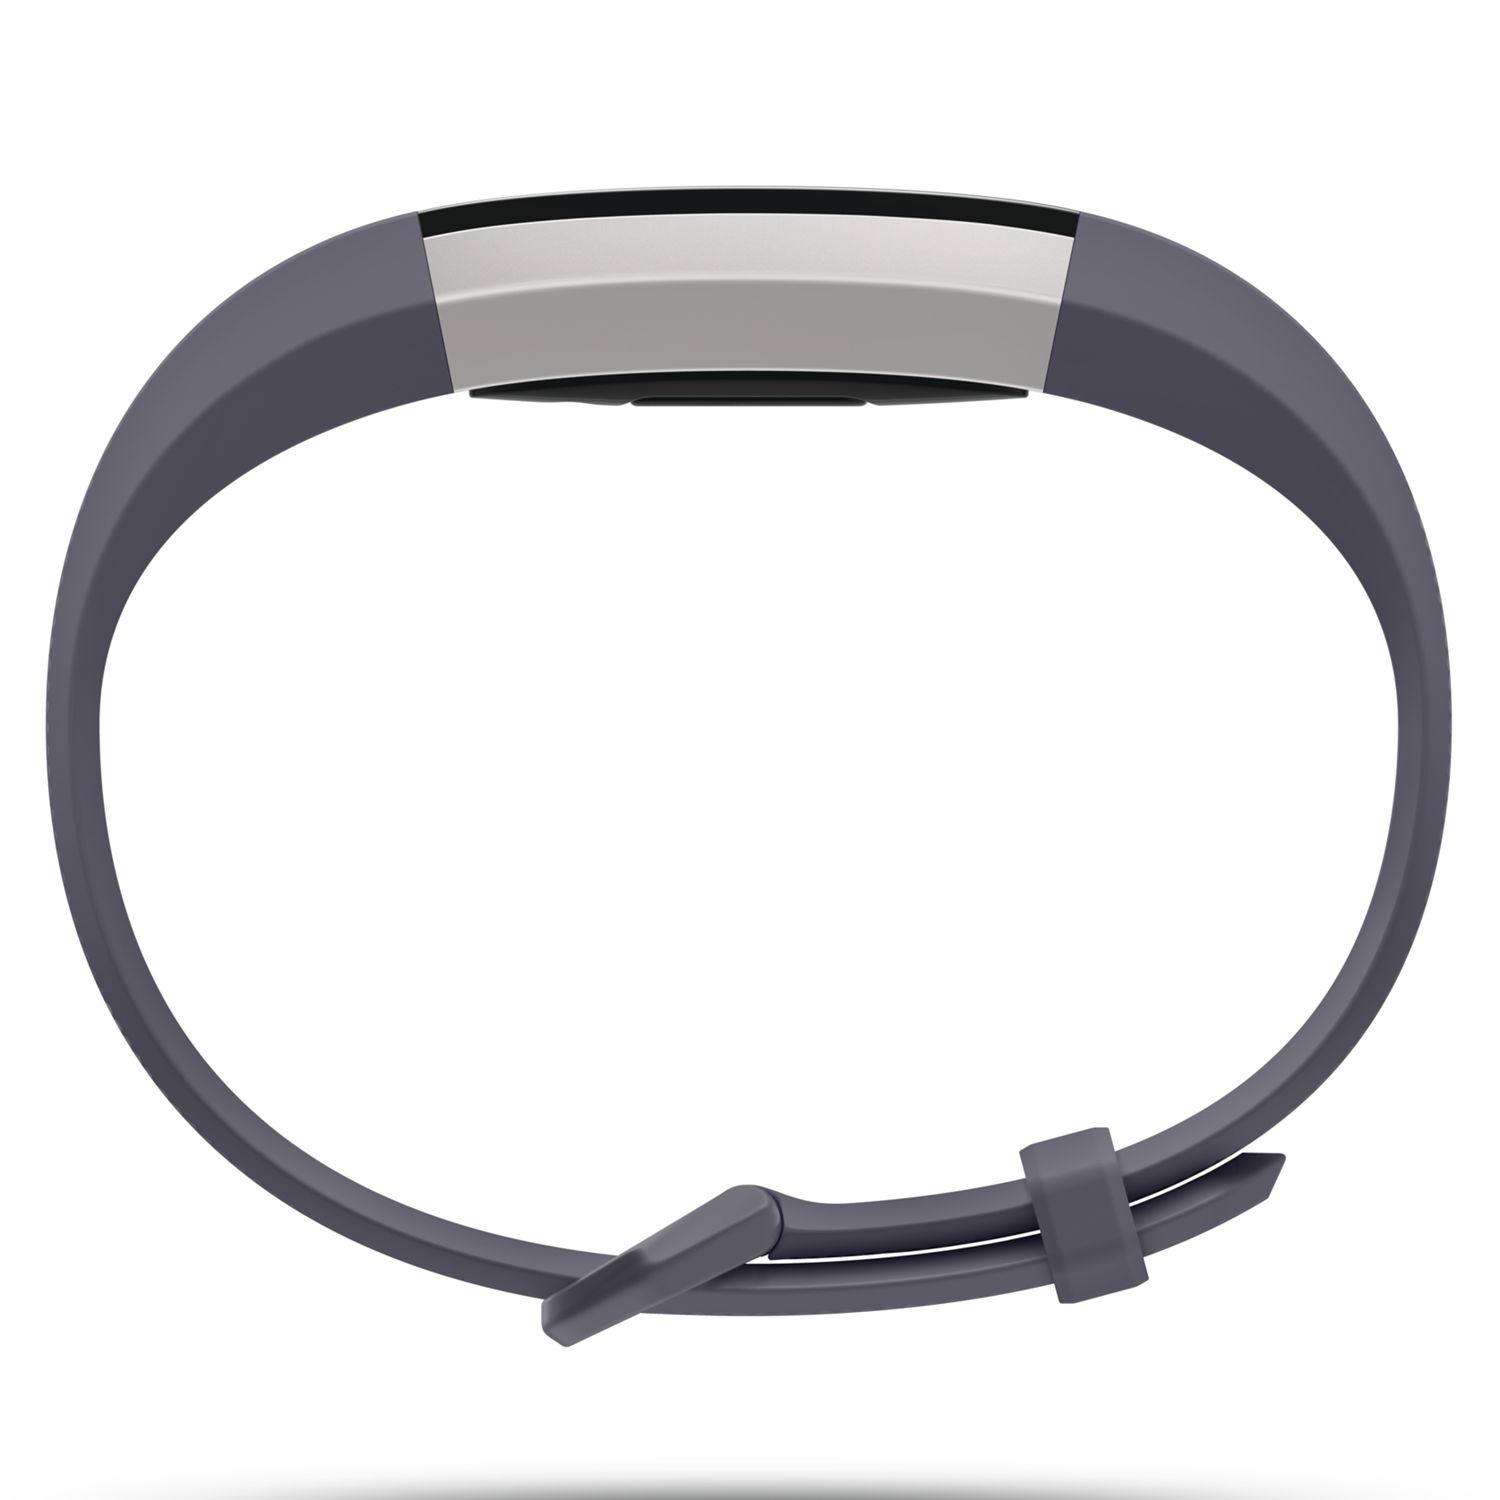 Fitbit Alta HR Heart Rate and Fitness 